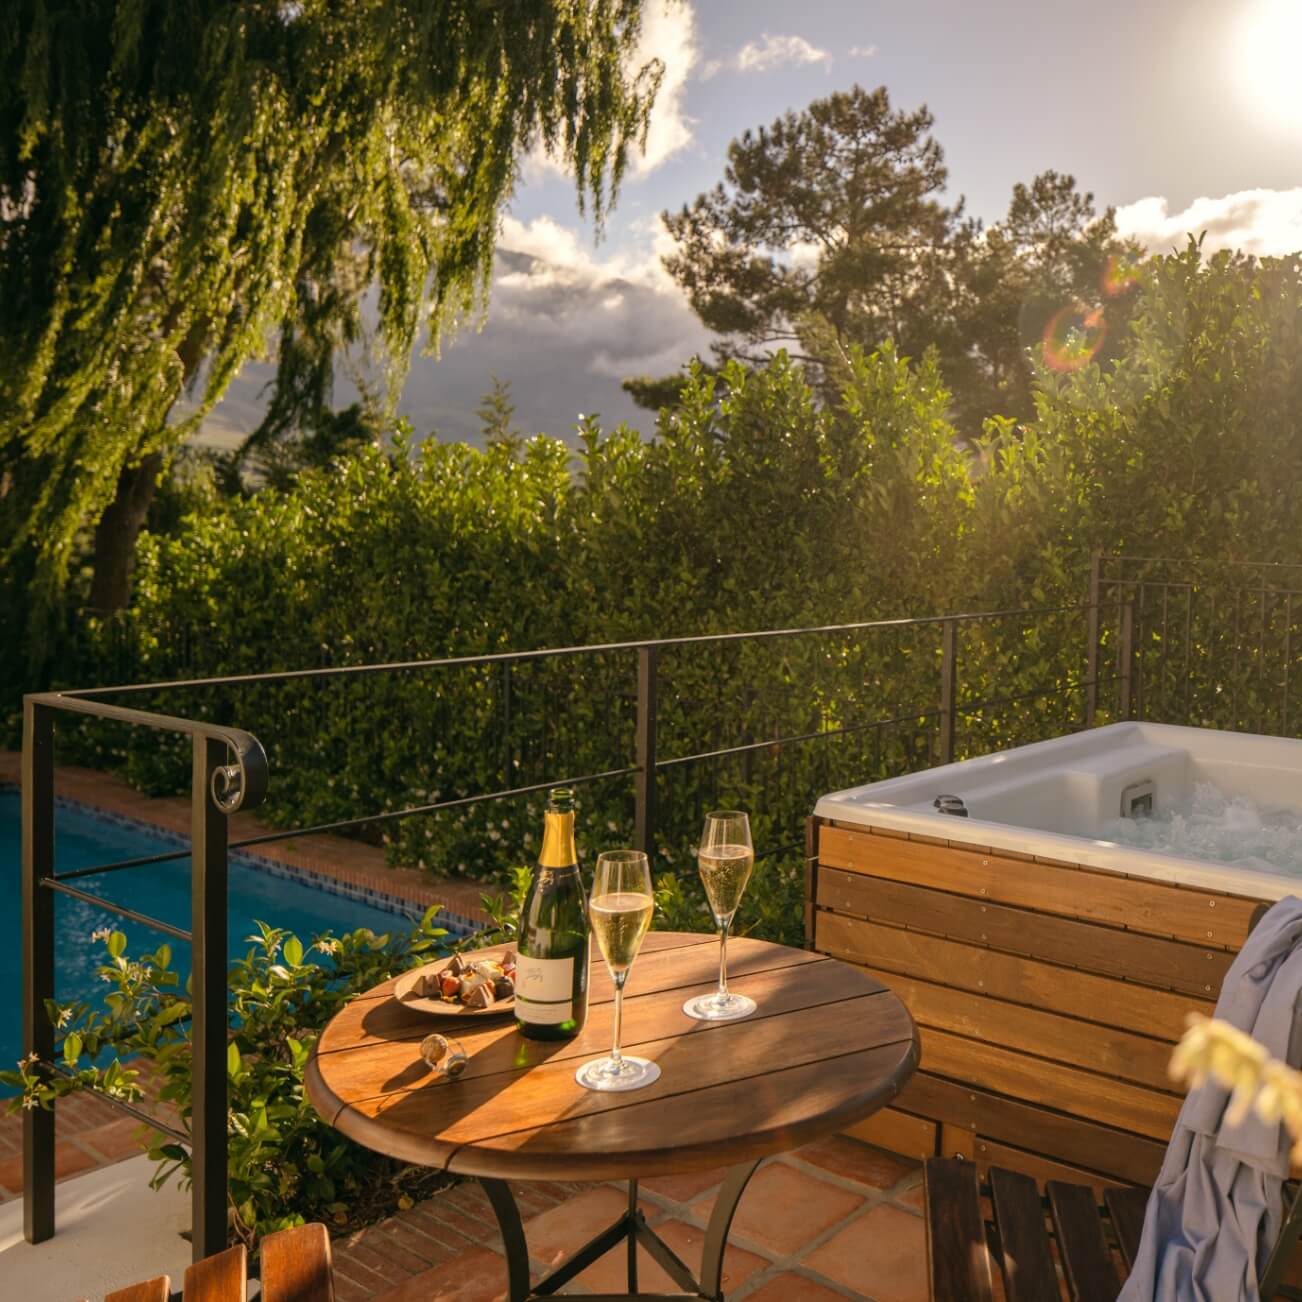 The Hot Tub and Pool at Fynbosch Cottage